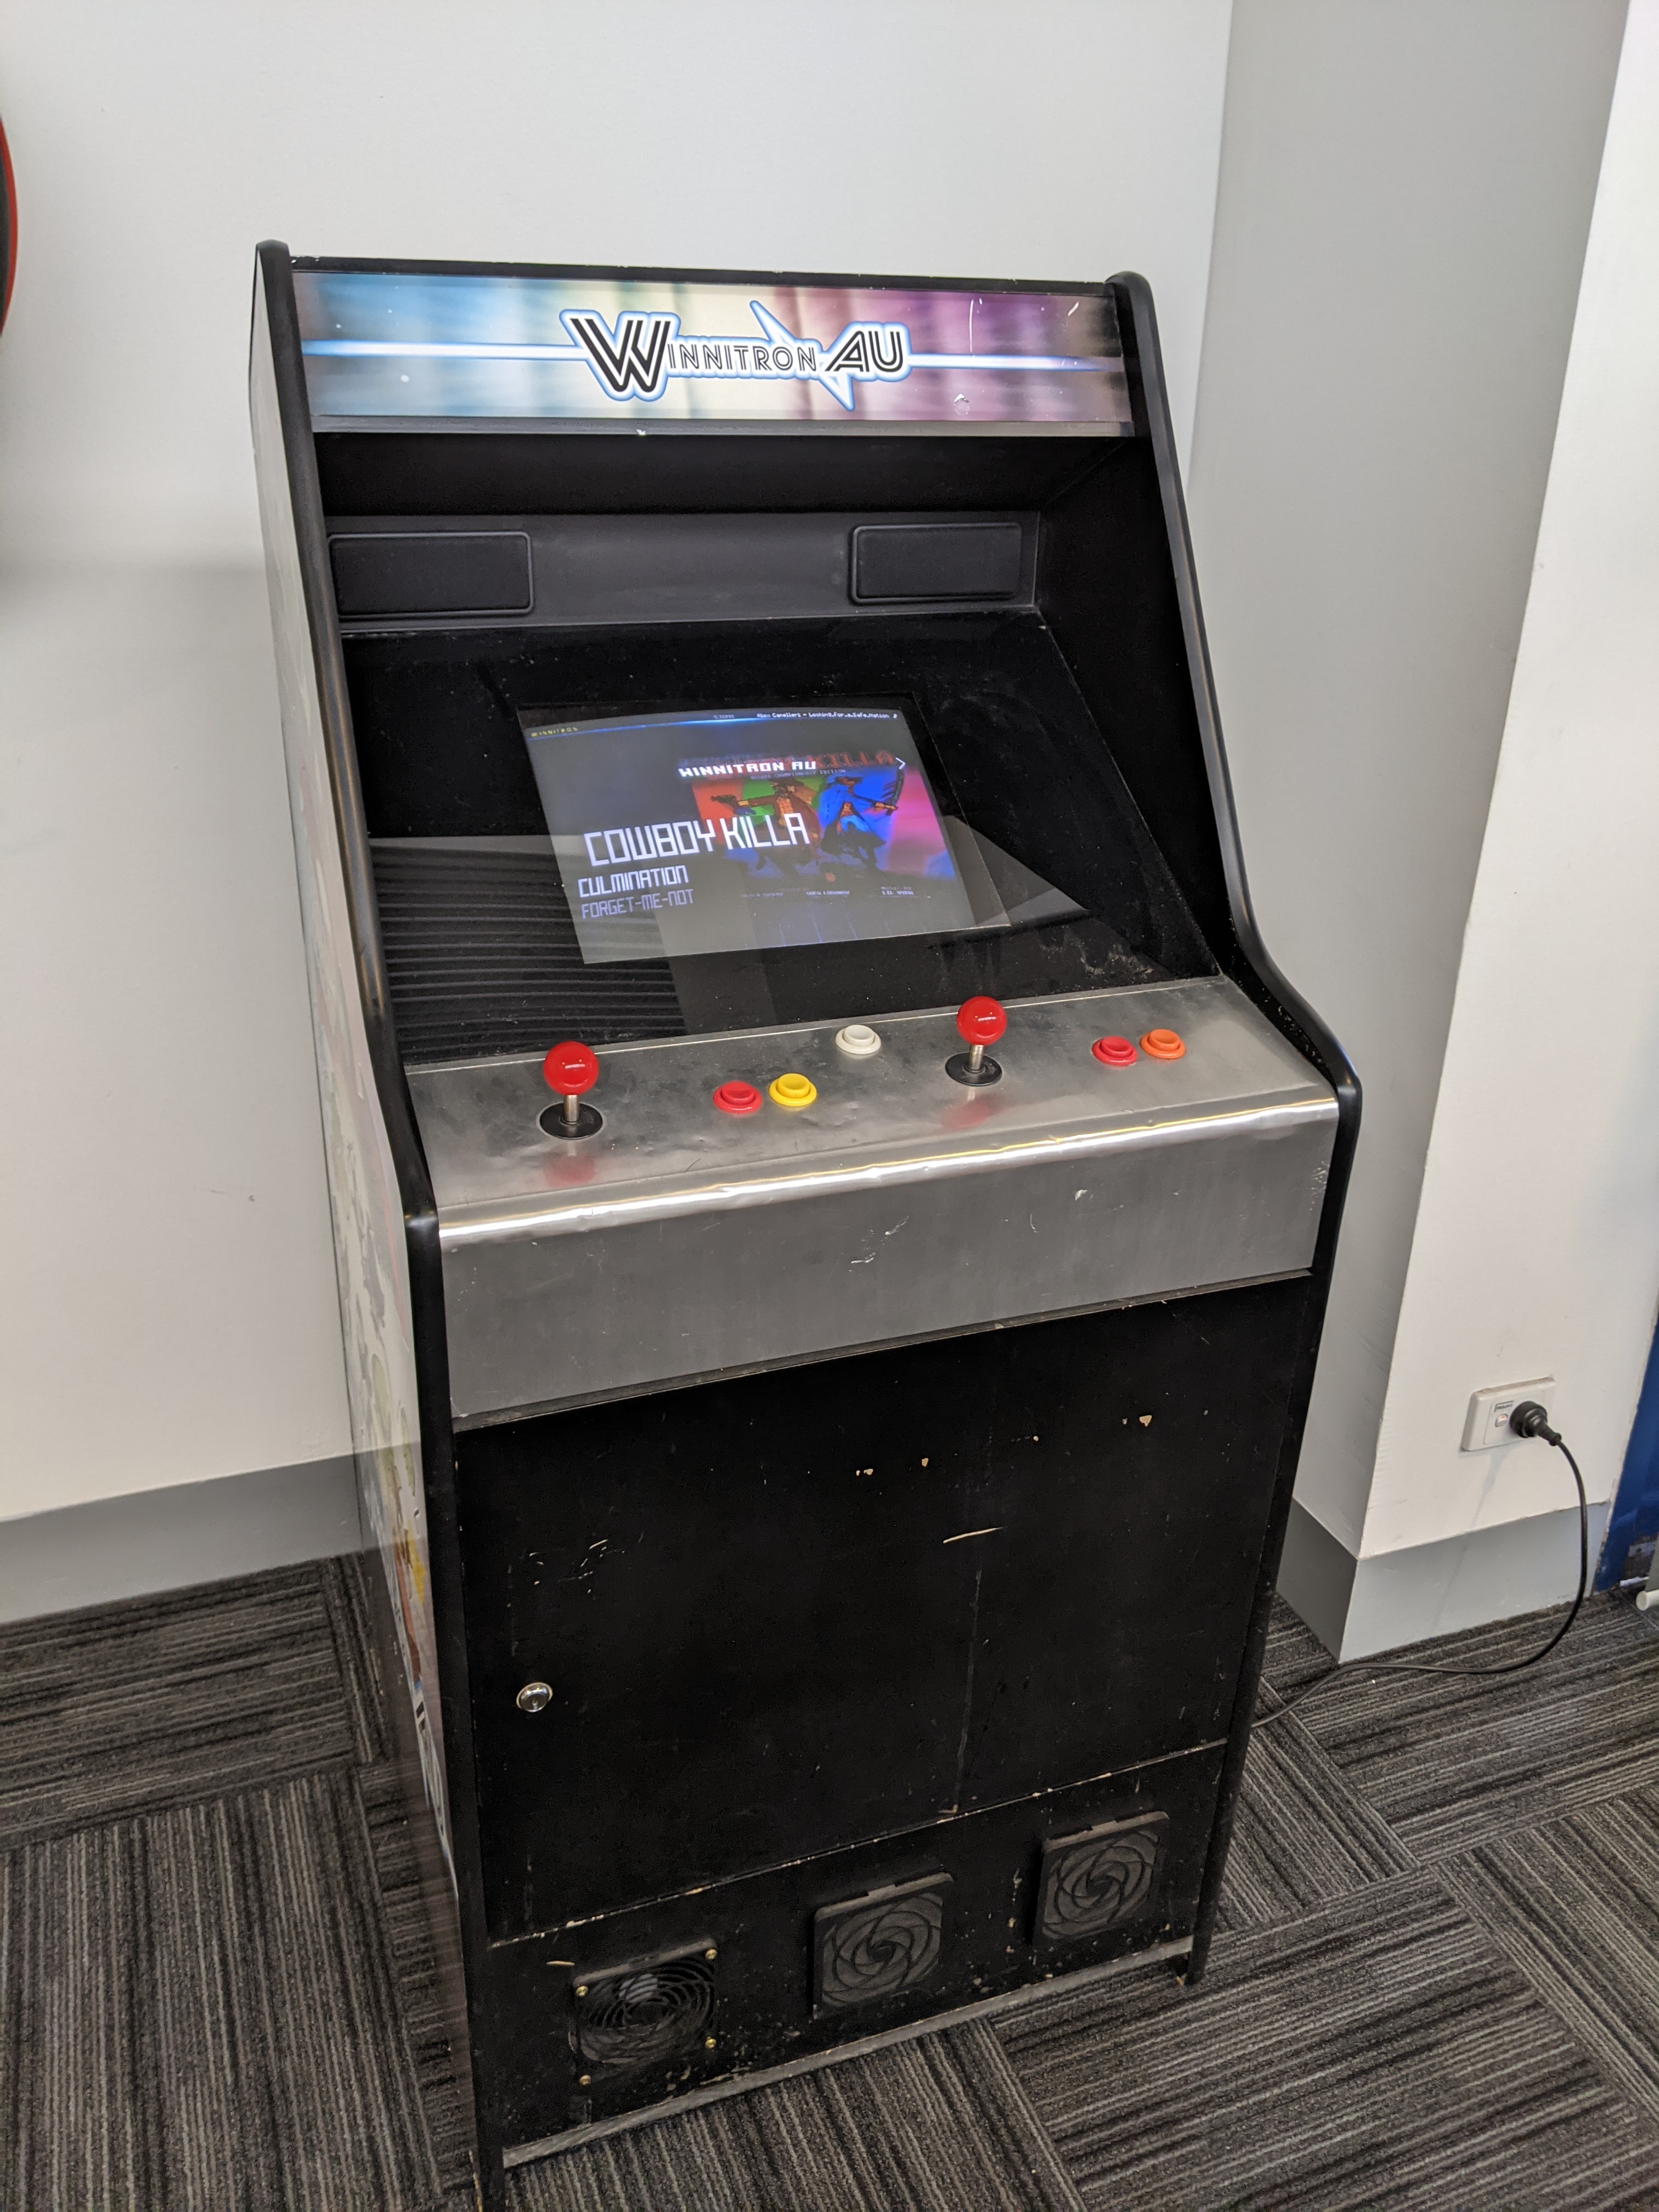 A photo of the Winnitron AU when it was briefly running at The Arcade 2.0.